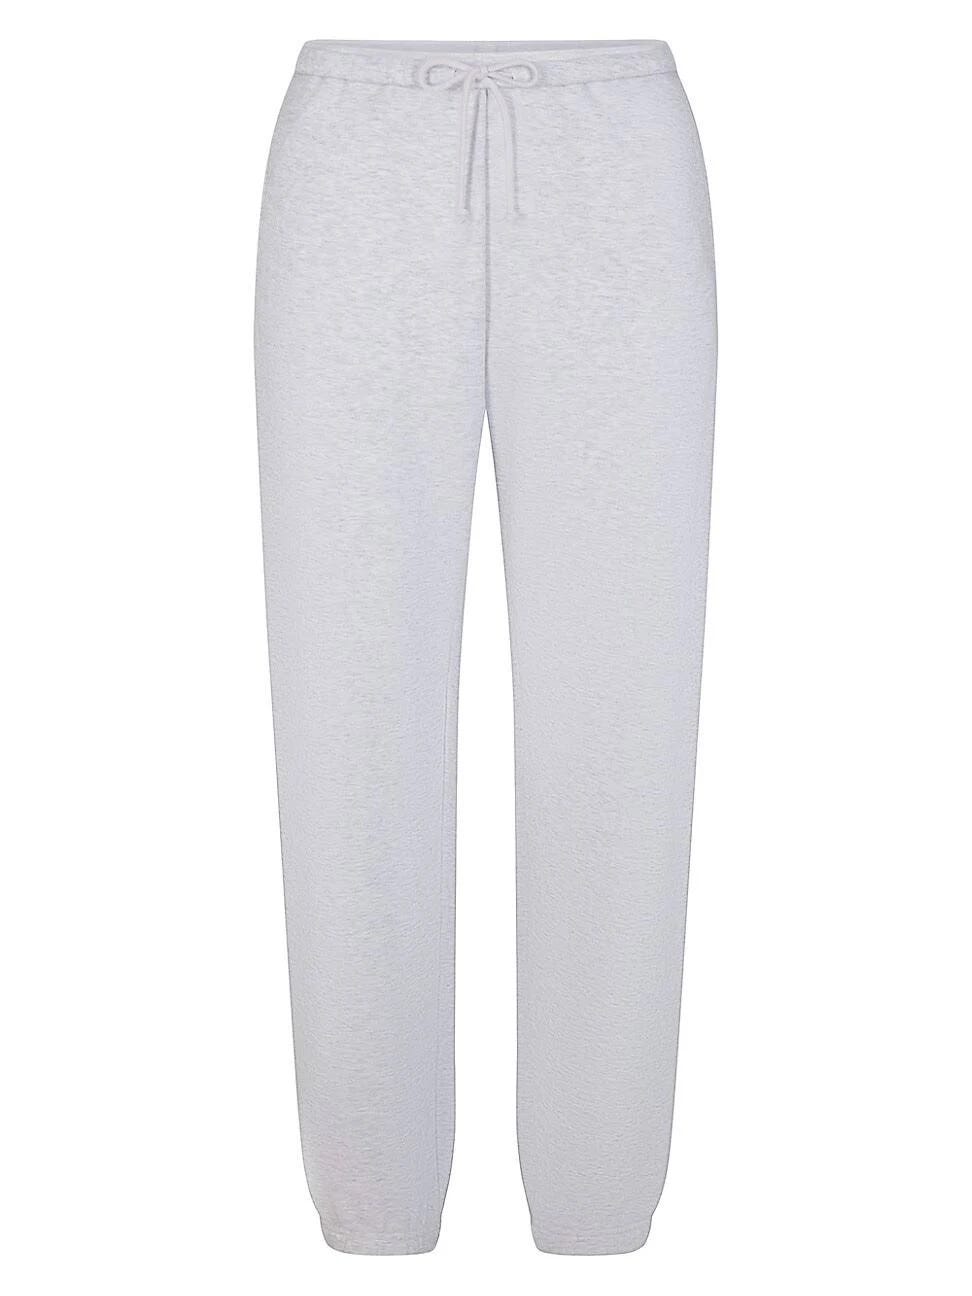 Comfy Grey Joggers for Women (XL) | Image